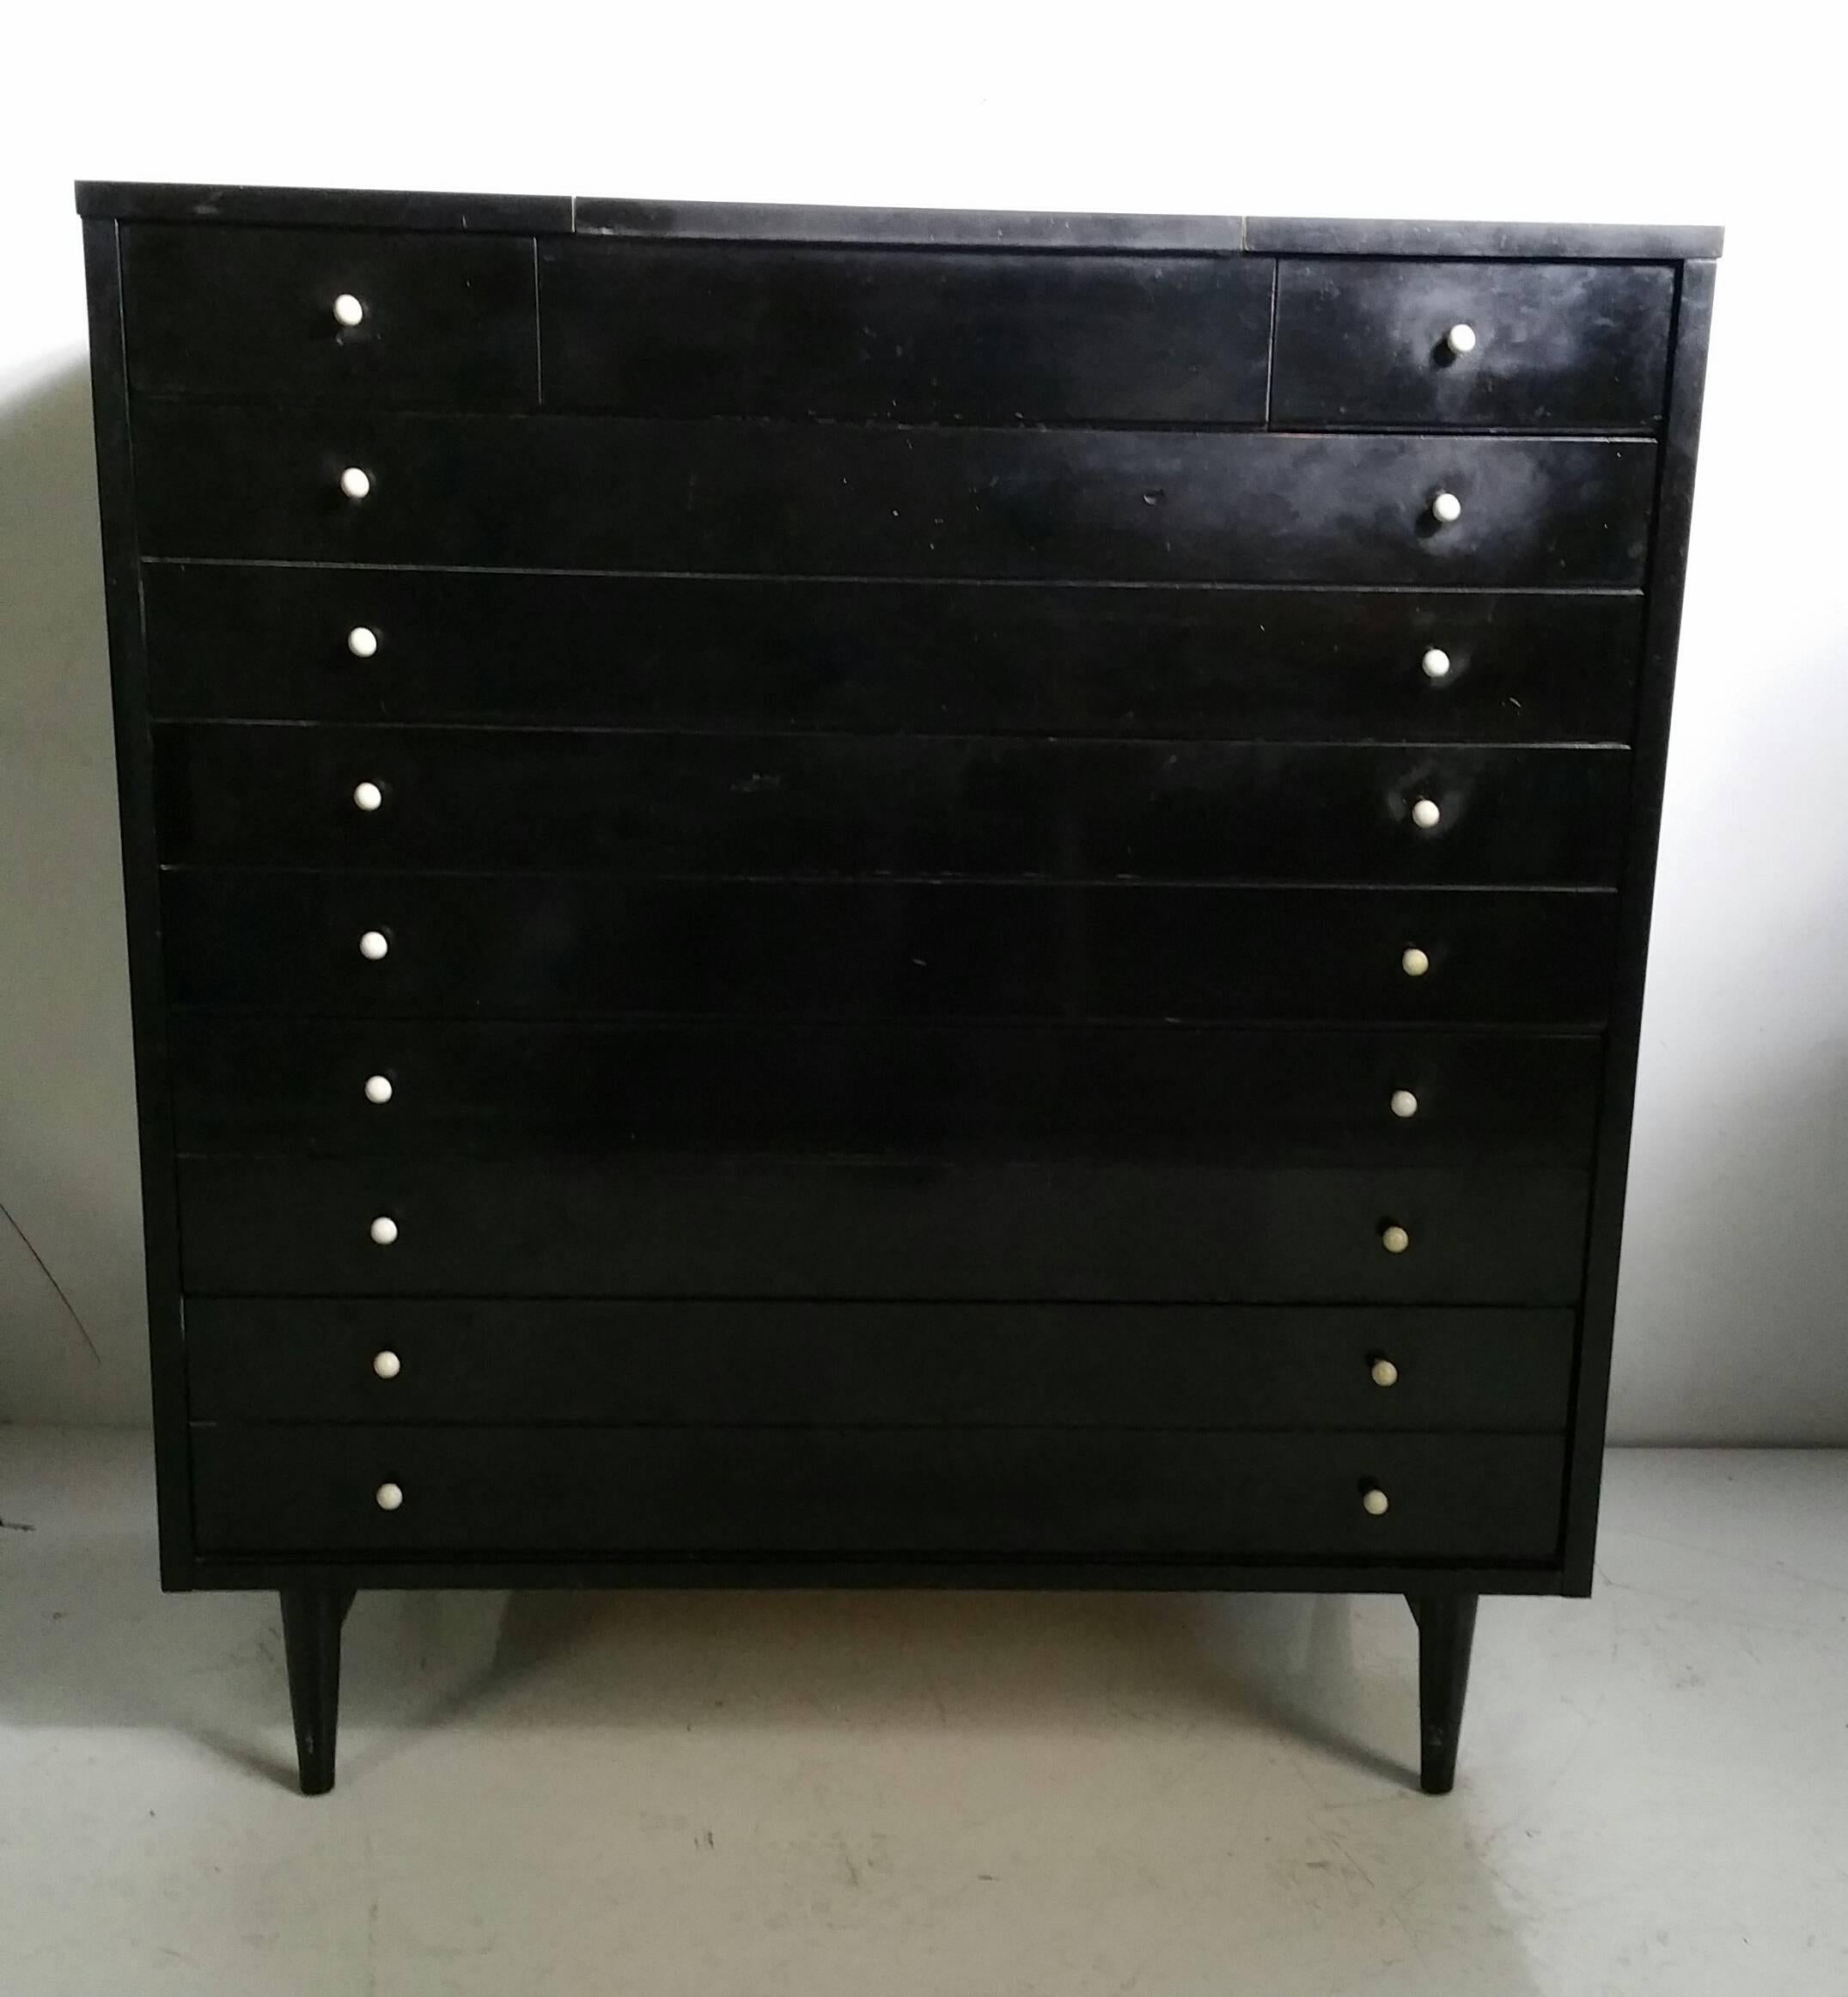 Mid-Century ebonized chest of drawers by American of Martinsville, USA, circa 1950s. Ebonized wood with a white laminate top, unusual pop up mirror, inside jewelry storage, beautiful white glass and brass pulls.. Manner of Paul McCobb.